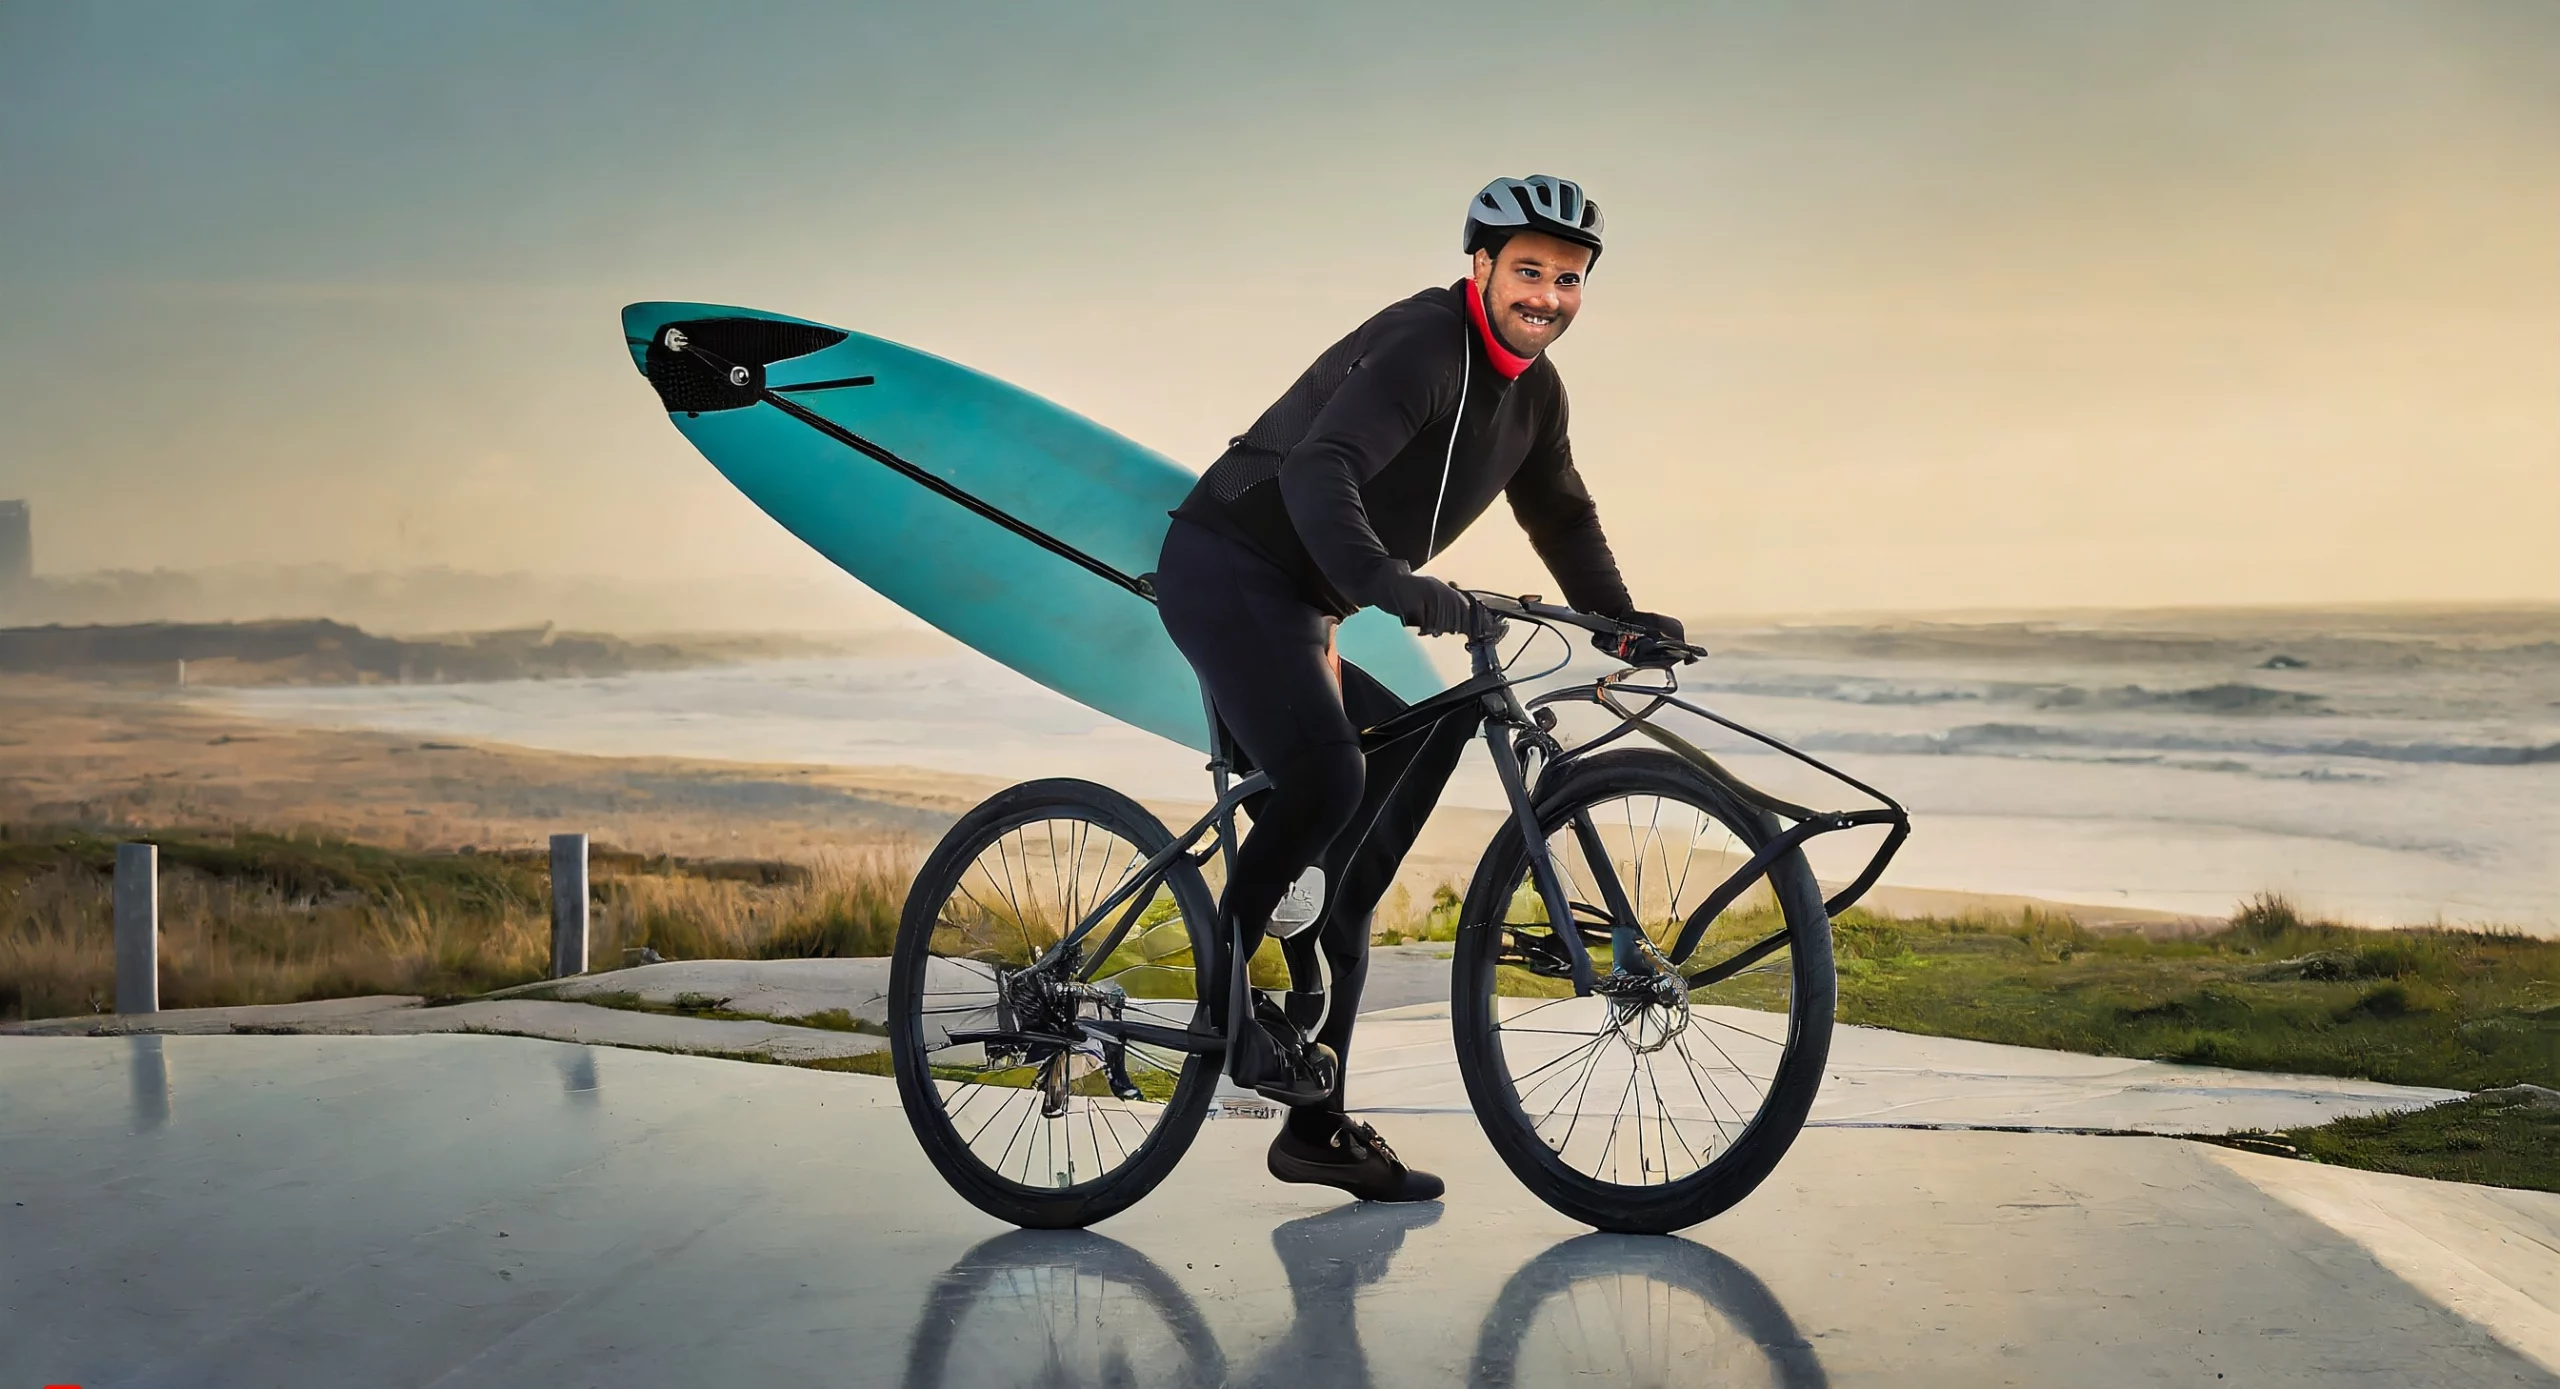 Carry a Surfboard On a E-Cycle